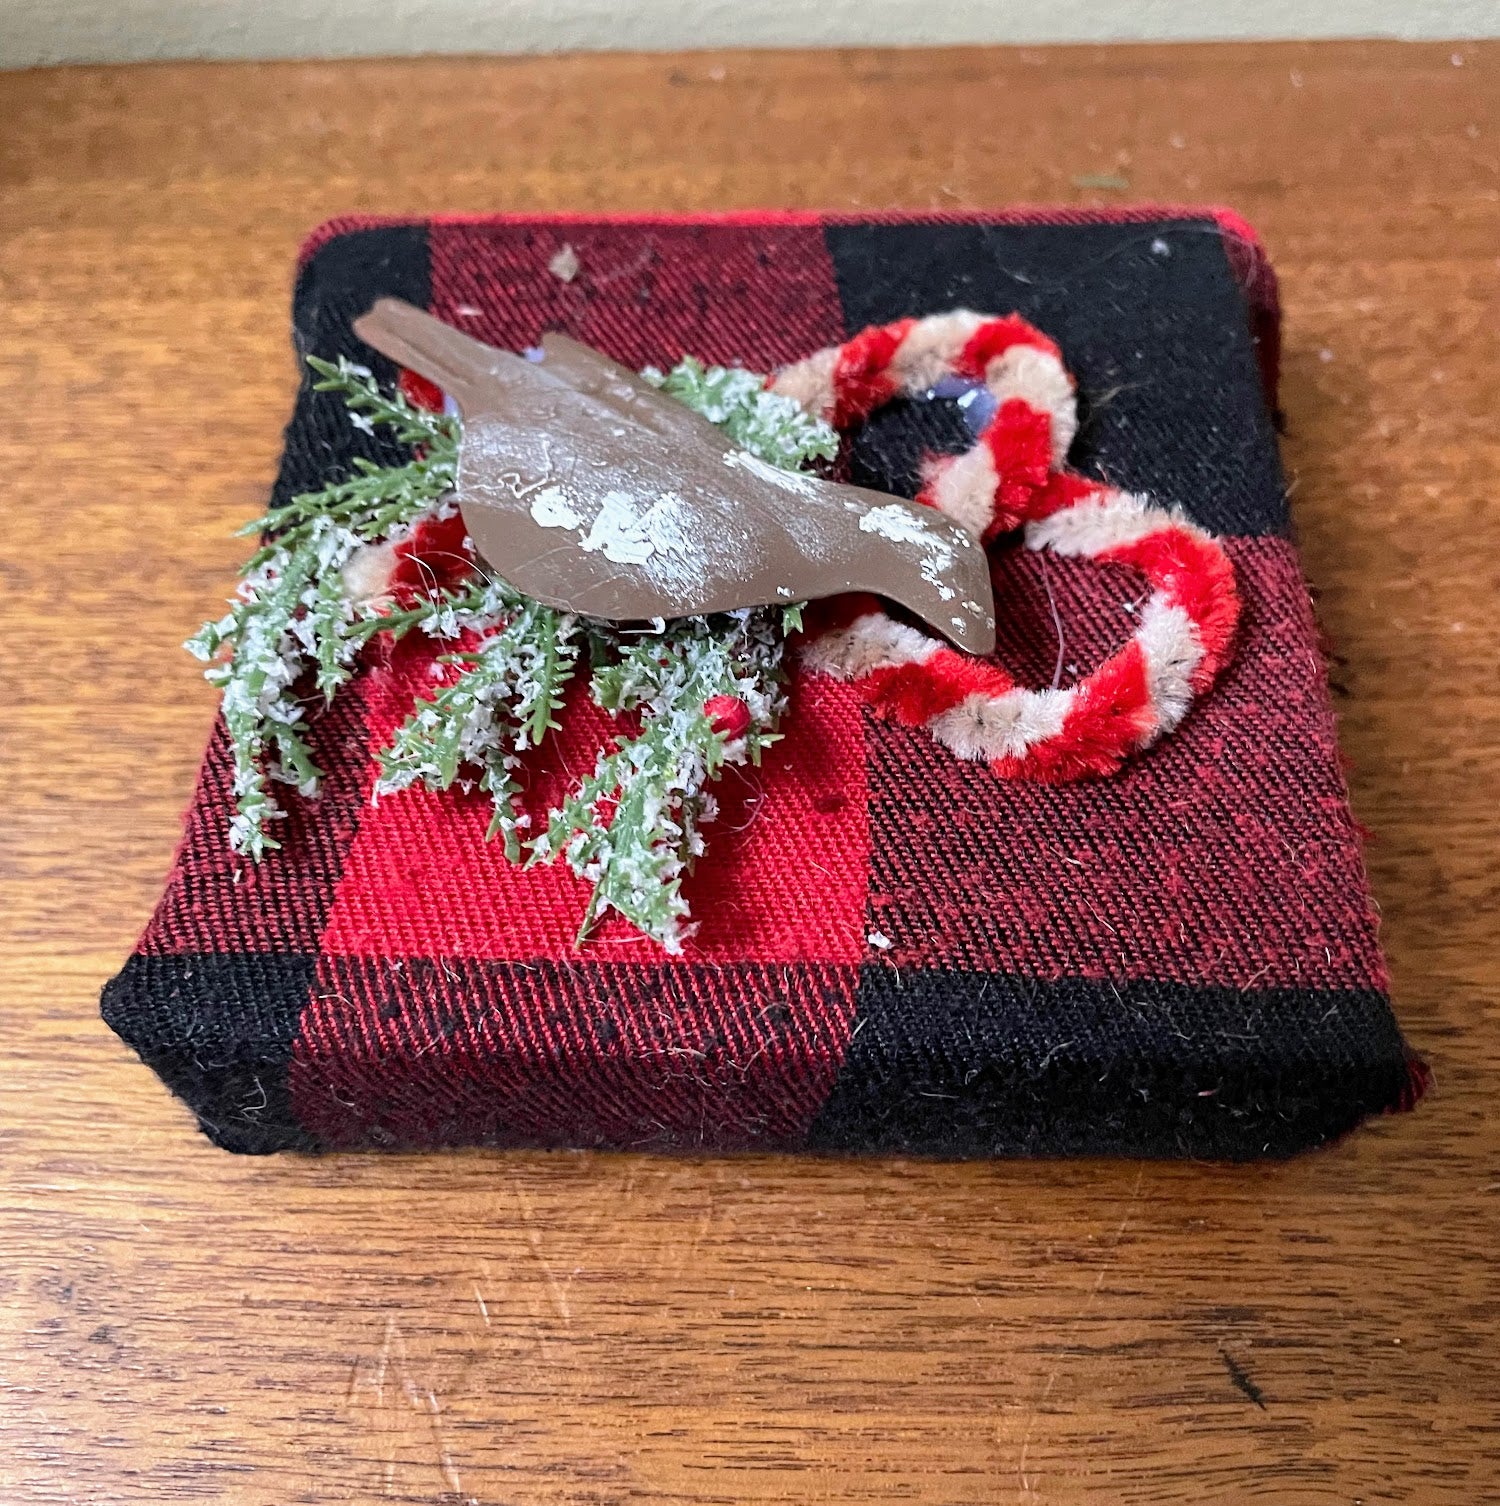 Primitive Colonial Handcrafted Christmas Plaid Present w/ Candy Canes